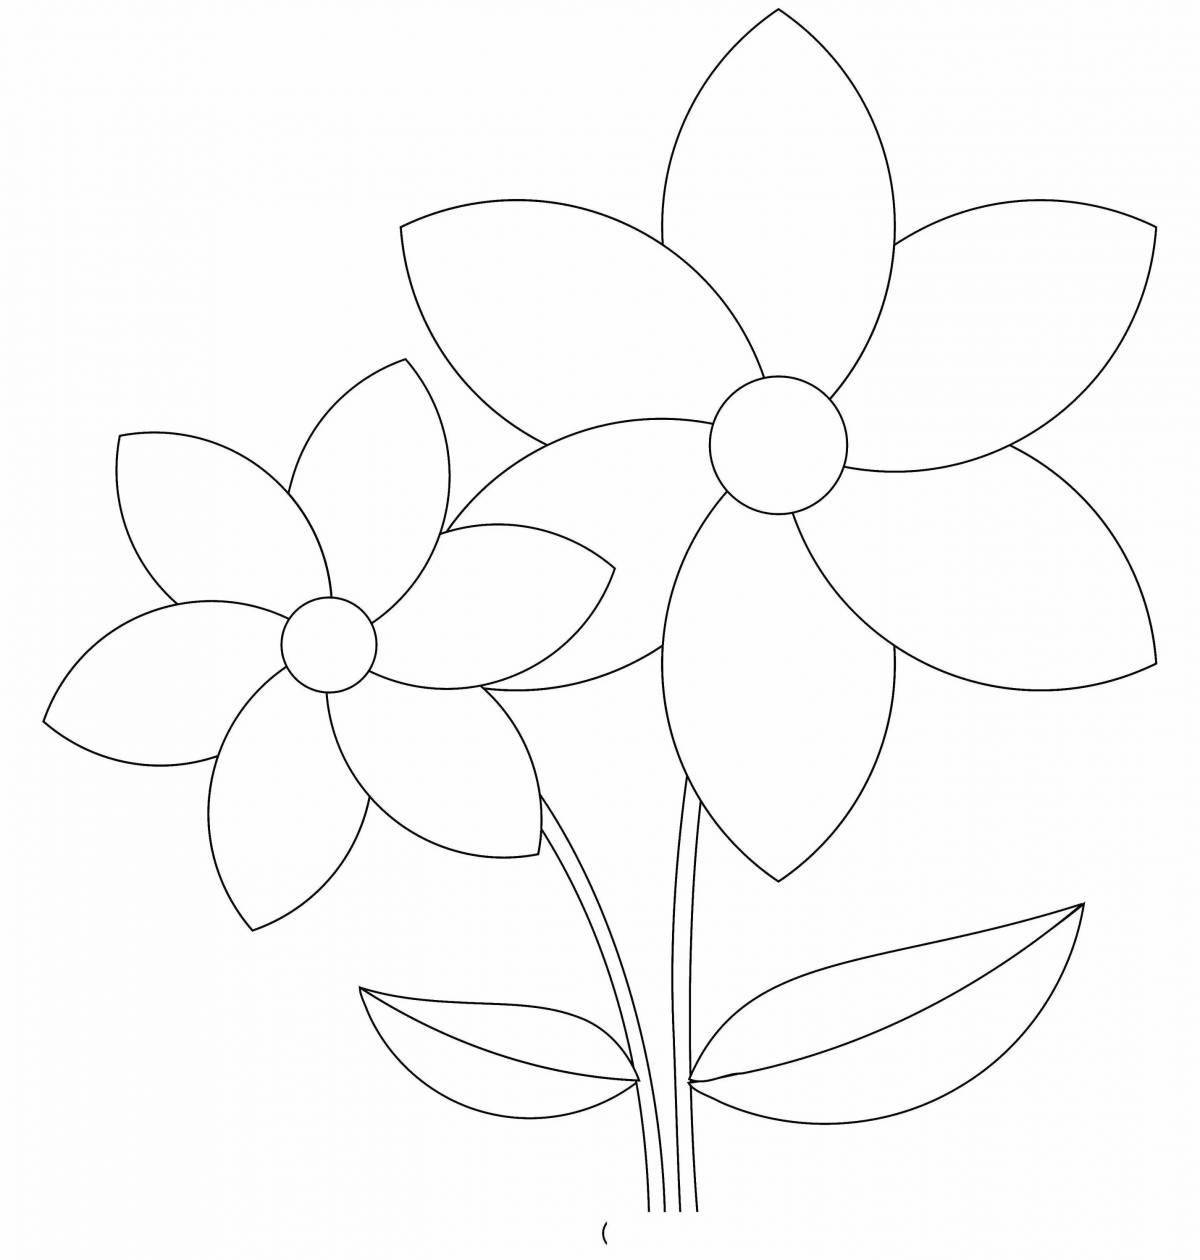 Coloring page with a playful flower pattern